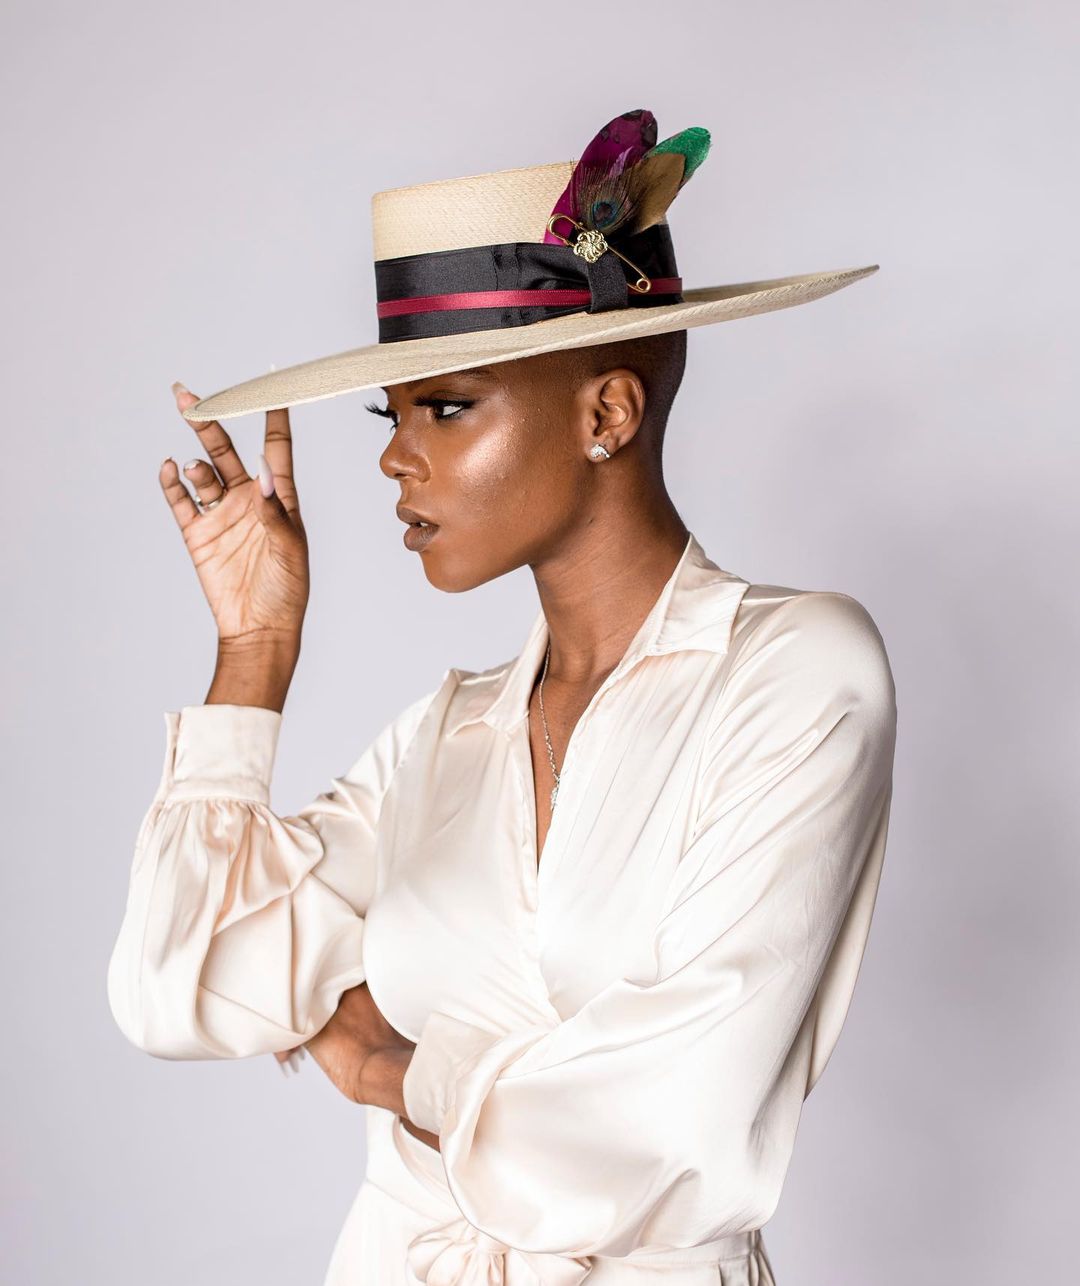 The Designers Behind Fruition Hat Co. On Launching A Black-Owned Accessories Brand